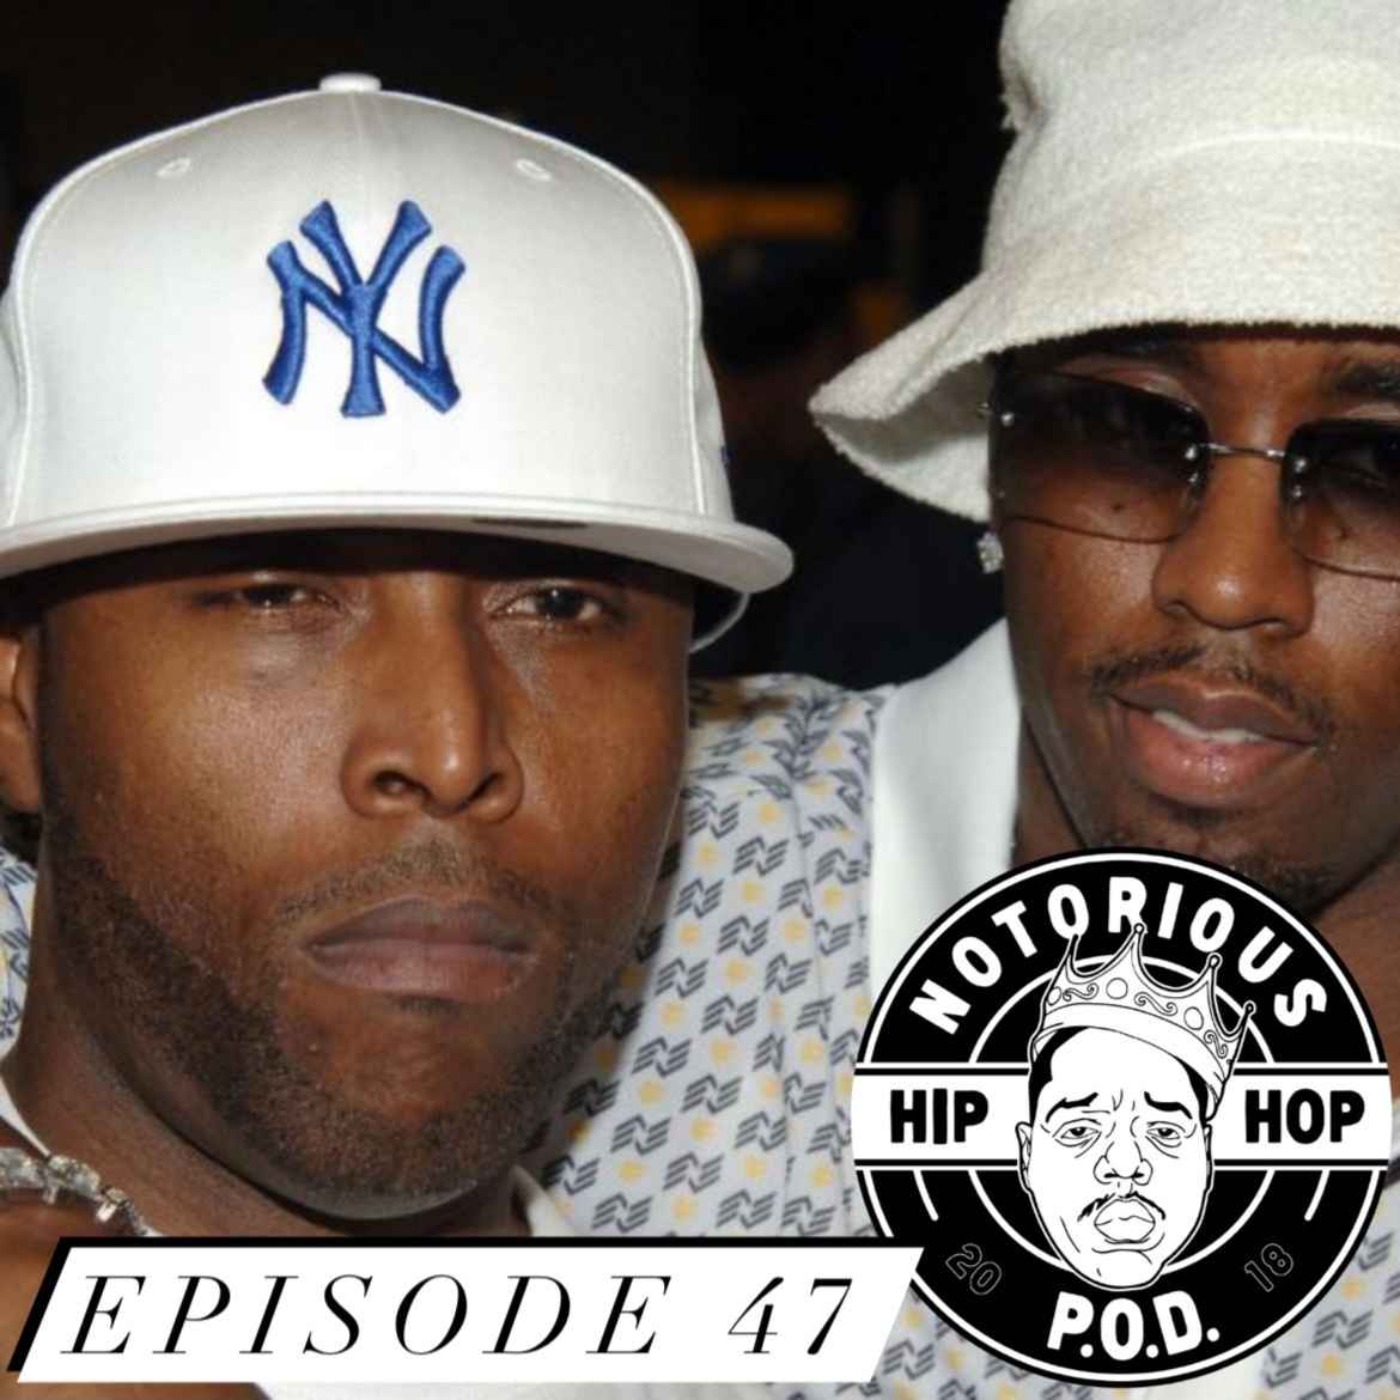 Ep. 47 | The HipHop Forum: Black Rob & why Cal is Cormega's plug...